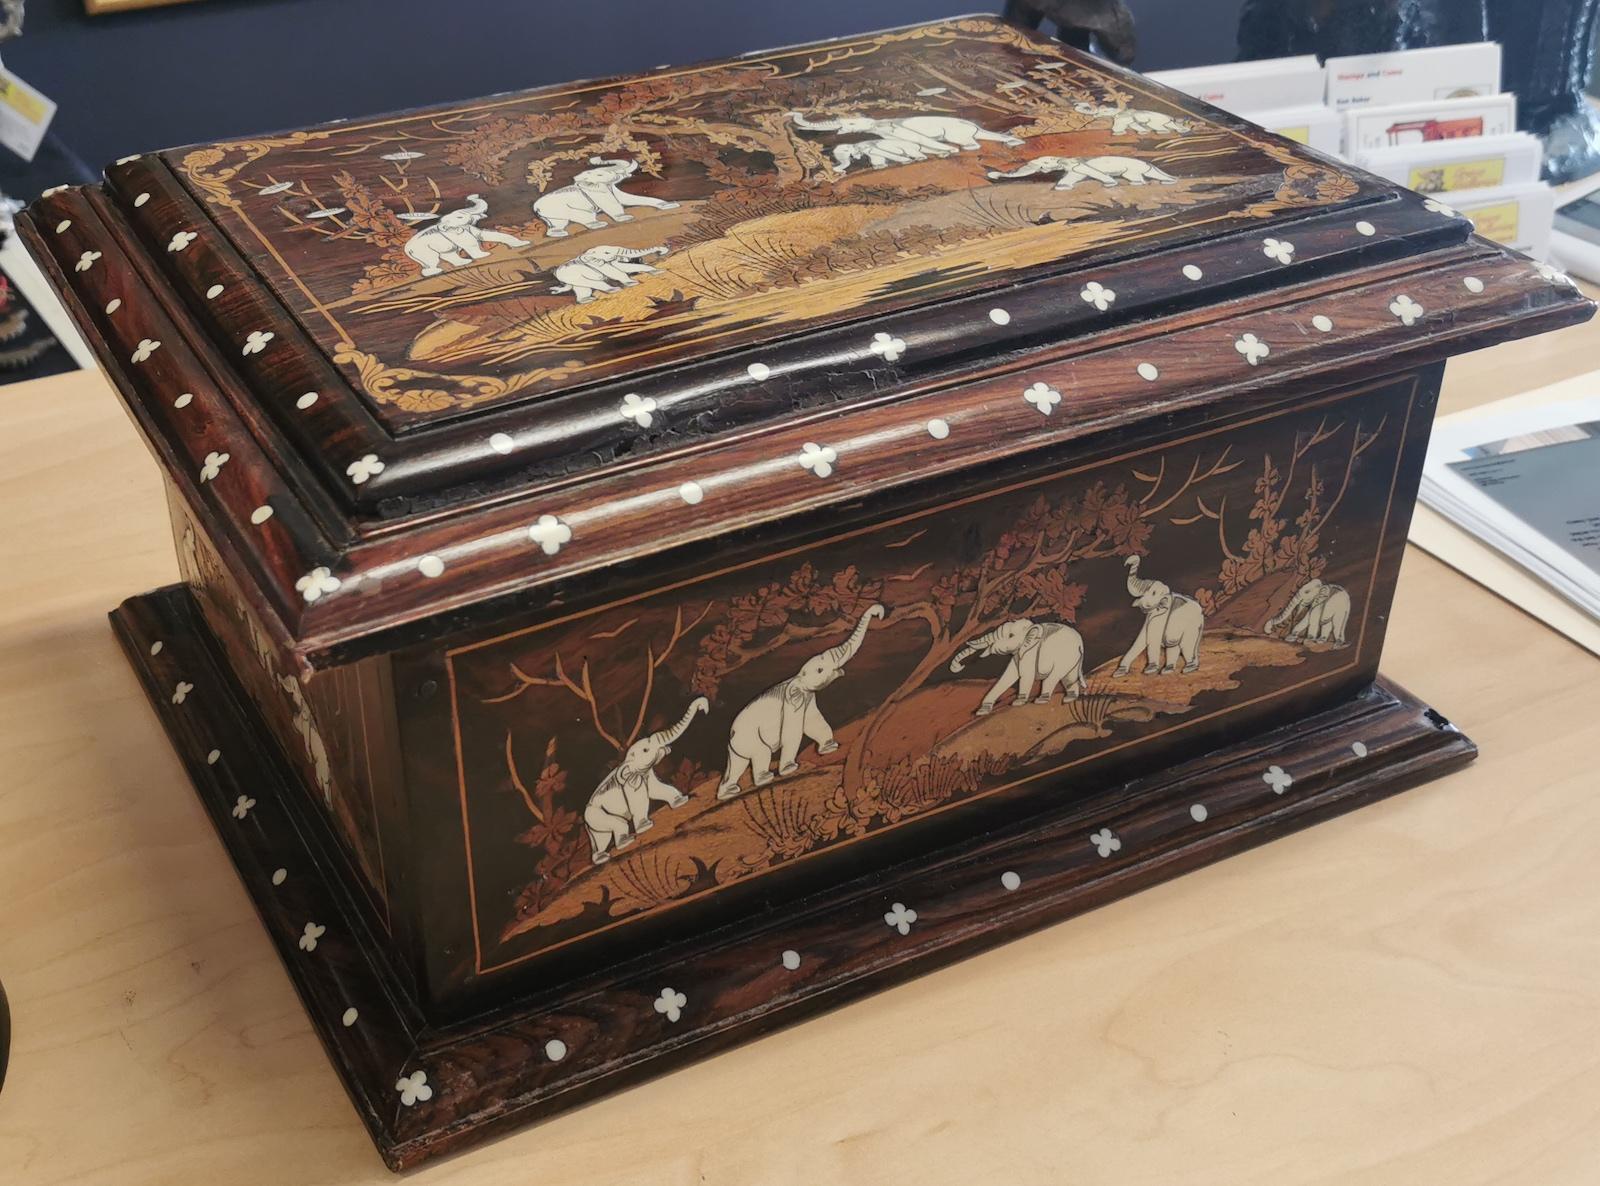 Anglo-Indian document box,
profusely decorated with 23 carved bone elephants,
Measures: 41 x 30 x 20cm
Our eclectic stock crosses cultures, continents, styles and famous names.